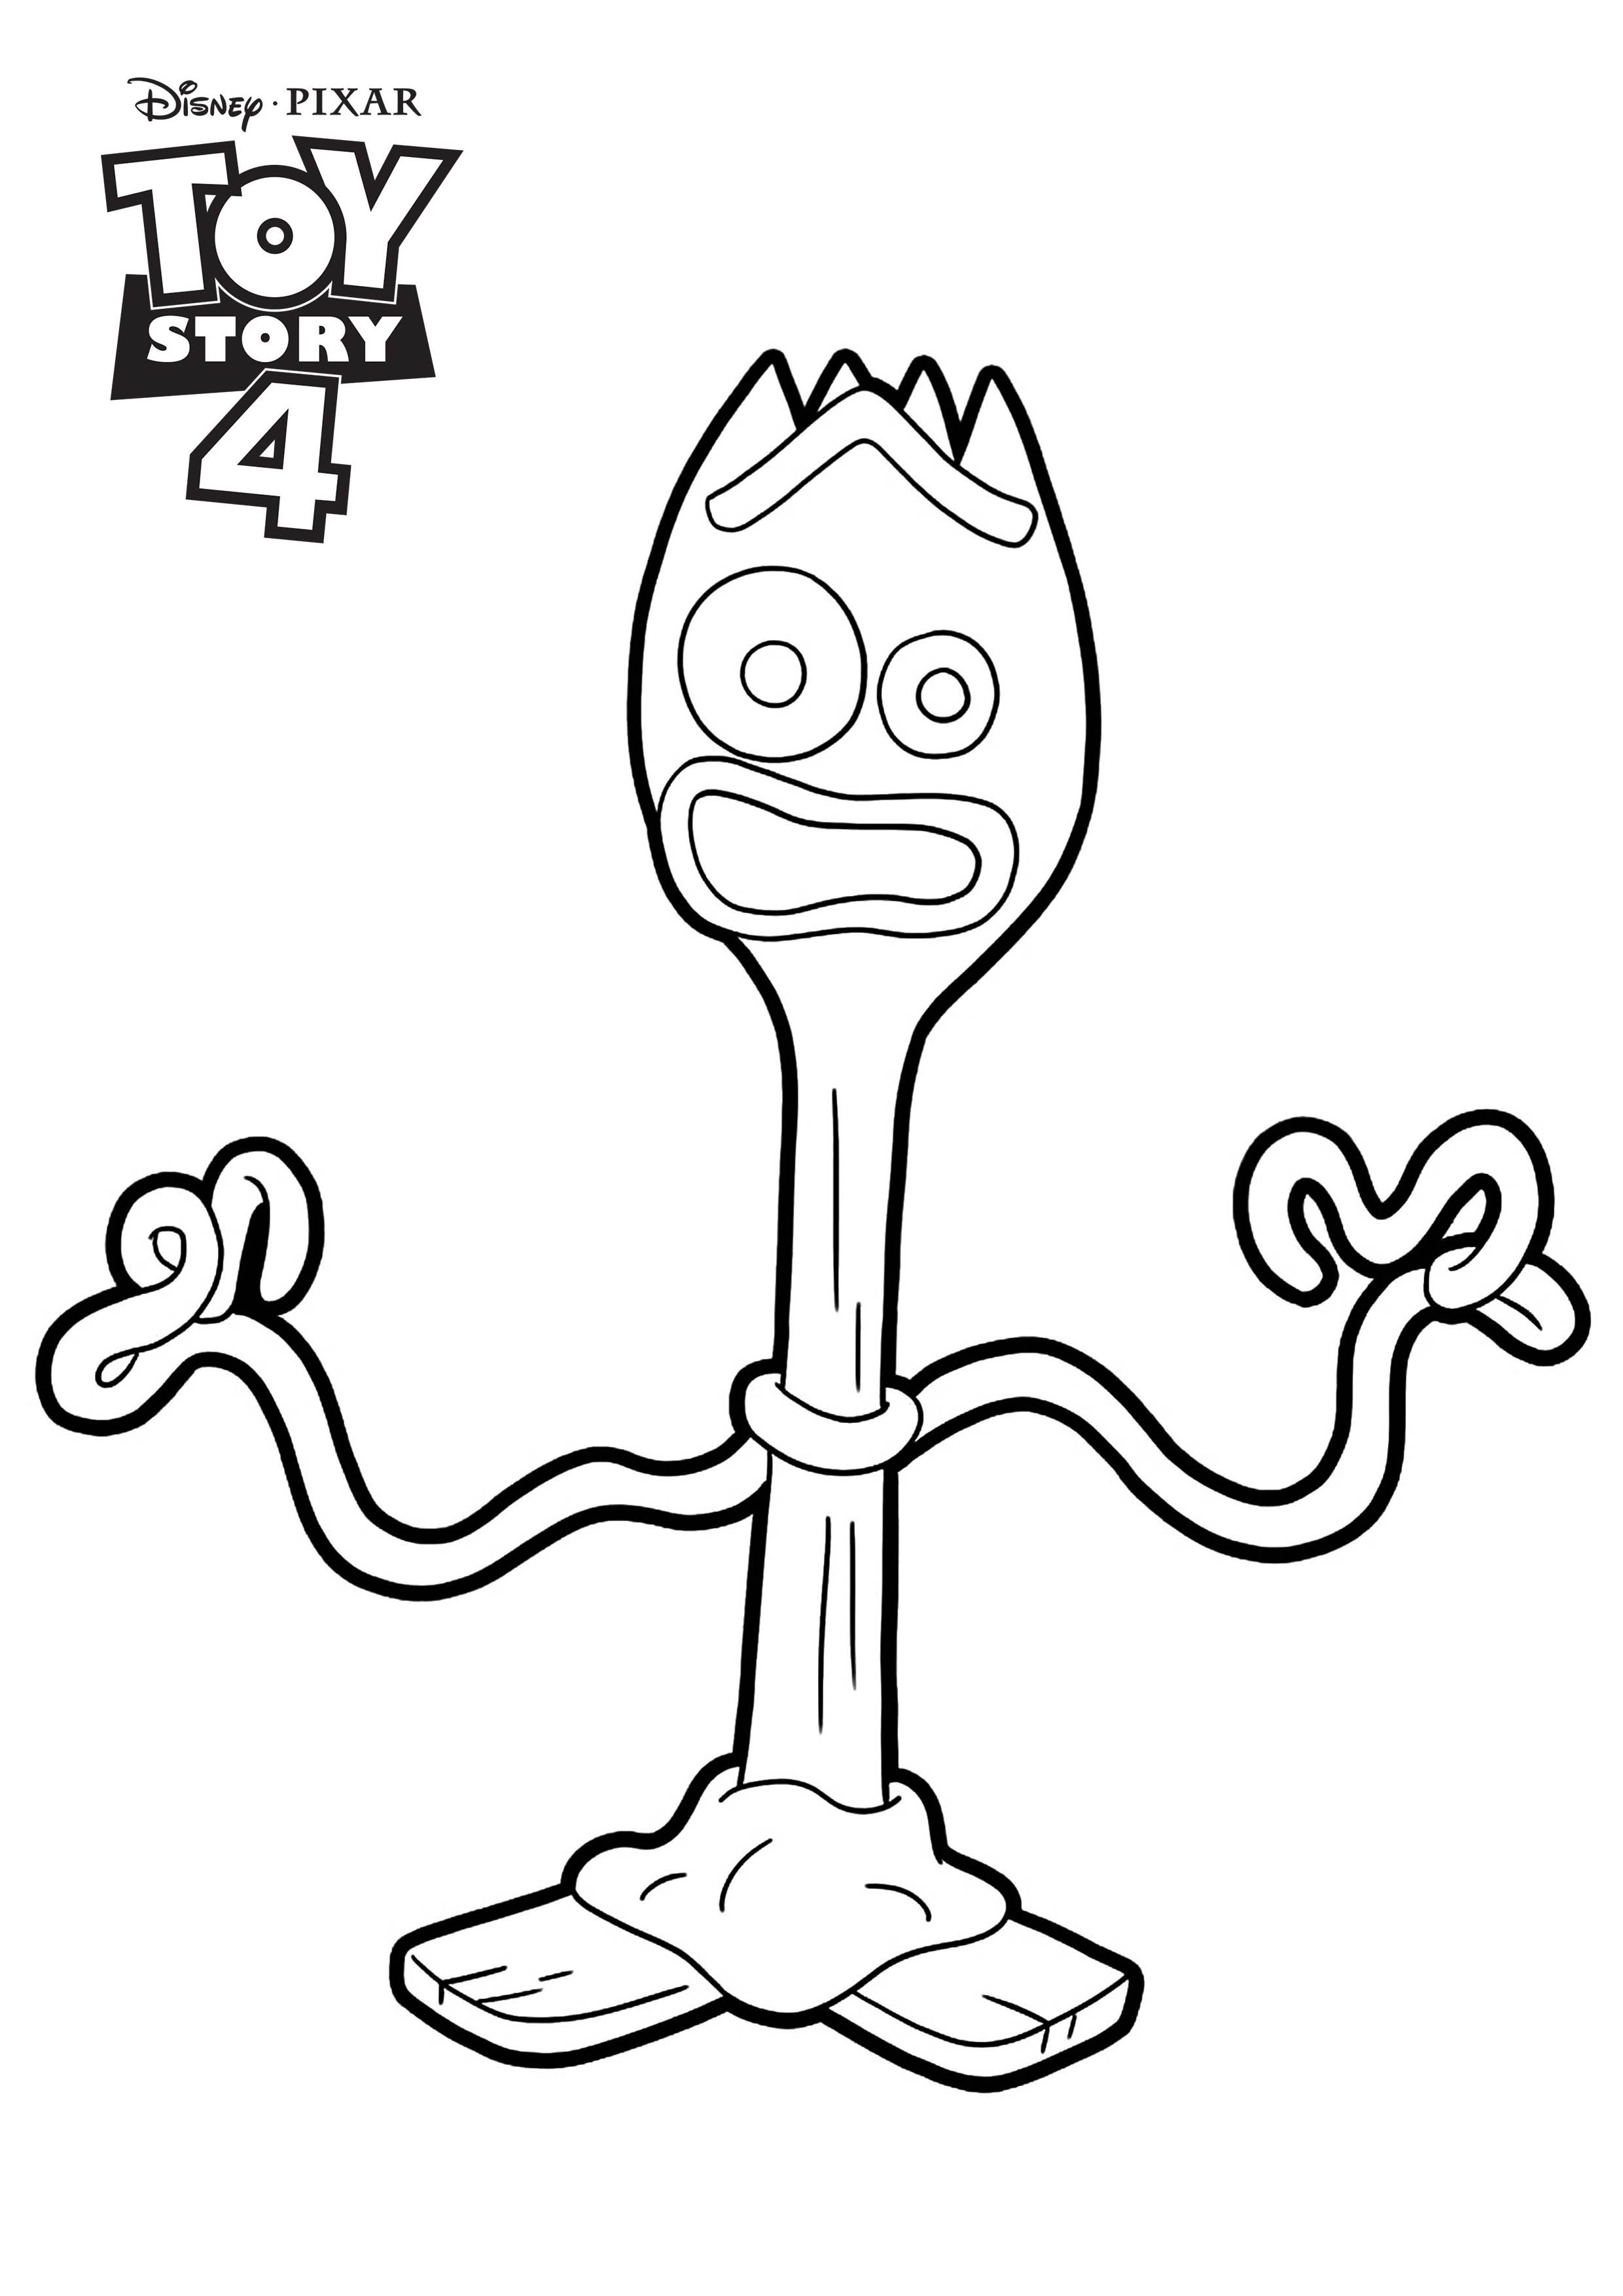 Forky Toy Story 4 coloring page Disney / Pixar Toy Story 4 Kids